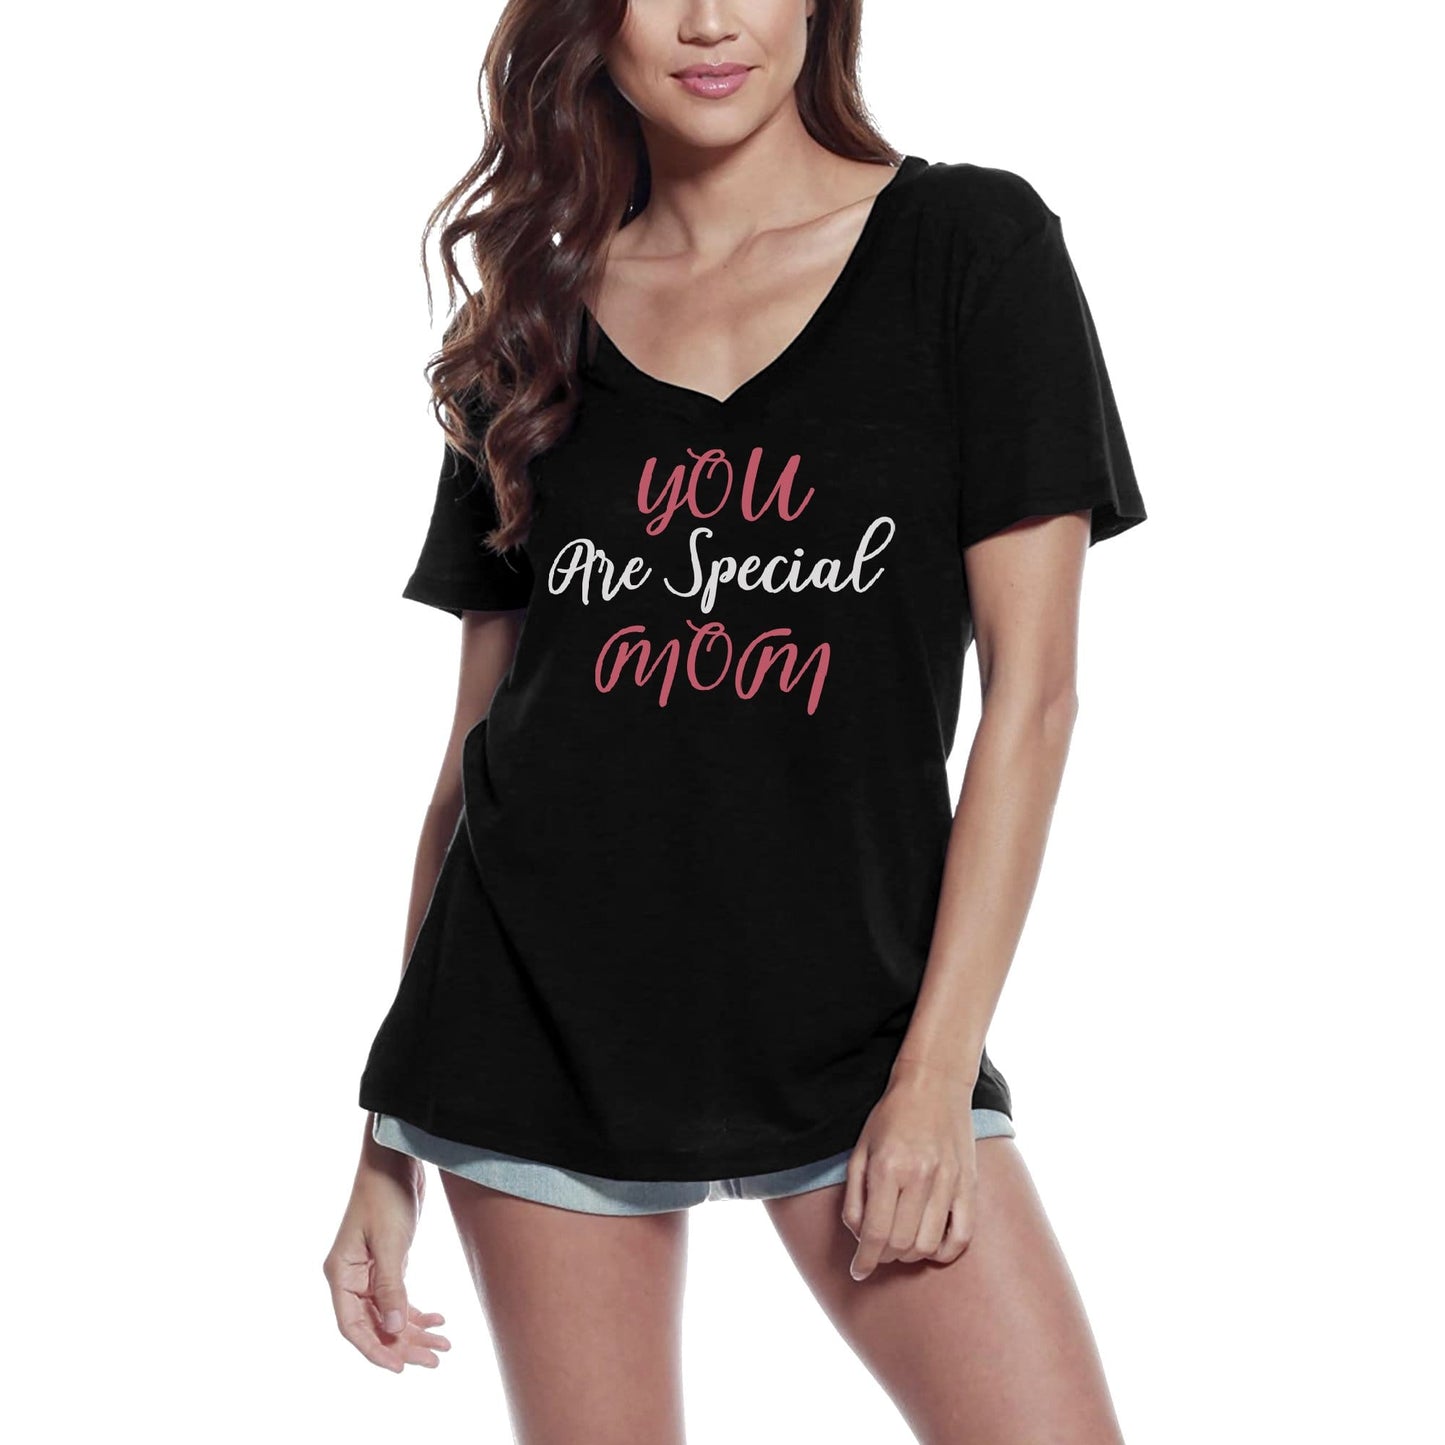 ULTRABASIC Women's T-Shirt You are Special Mom - Short Sleeve Tee Shirt Tops